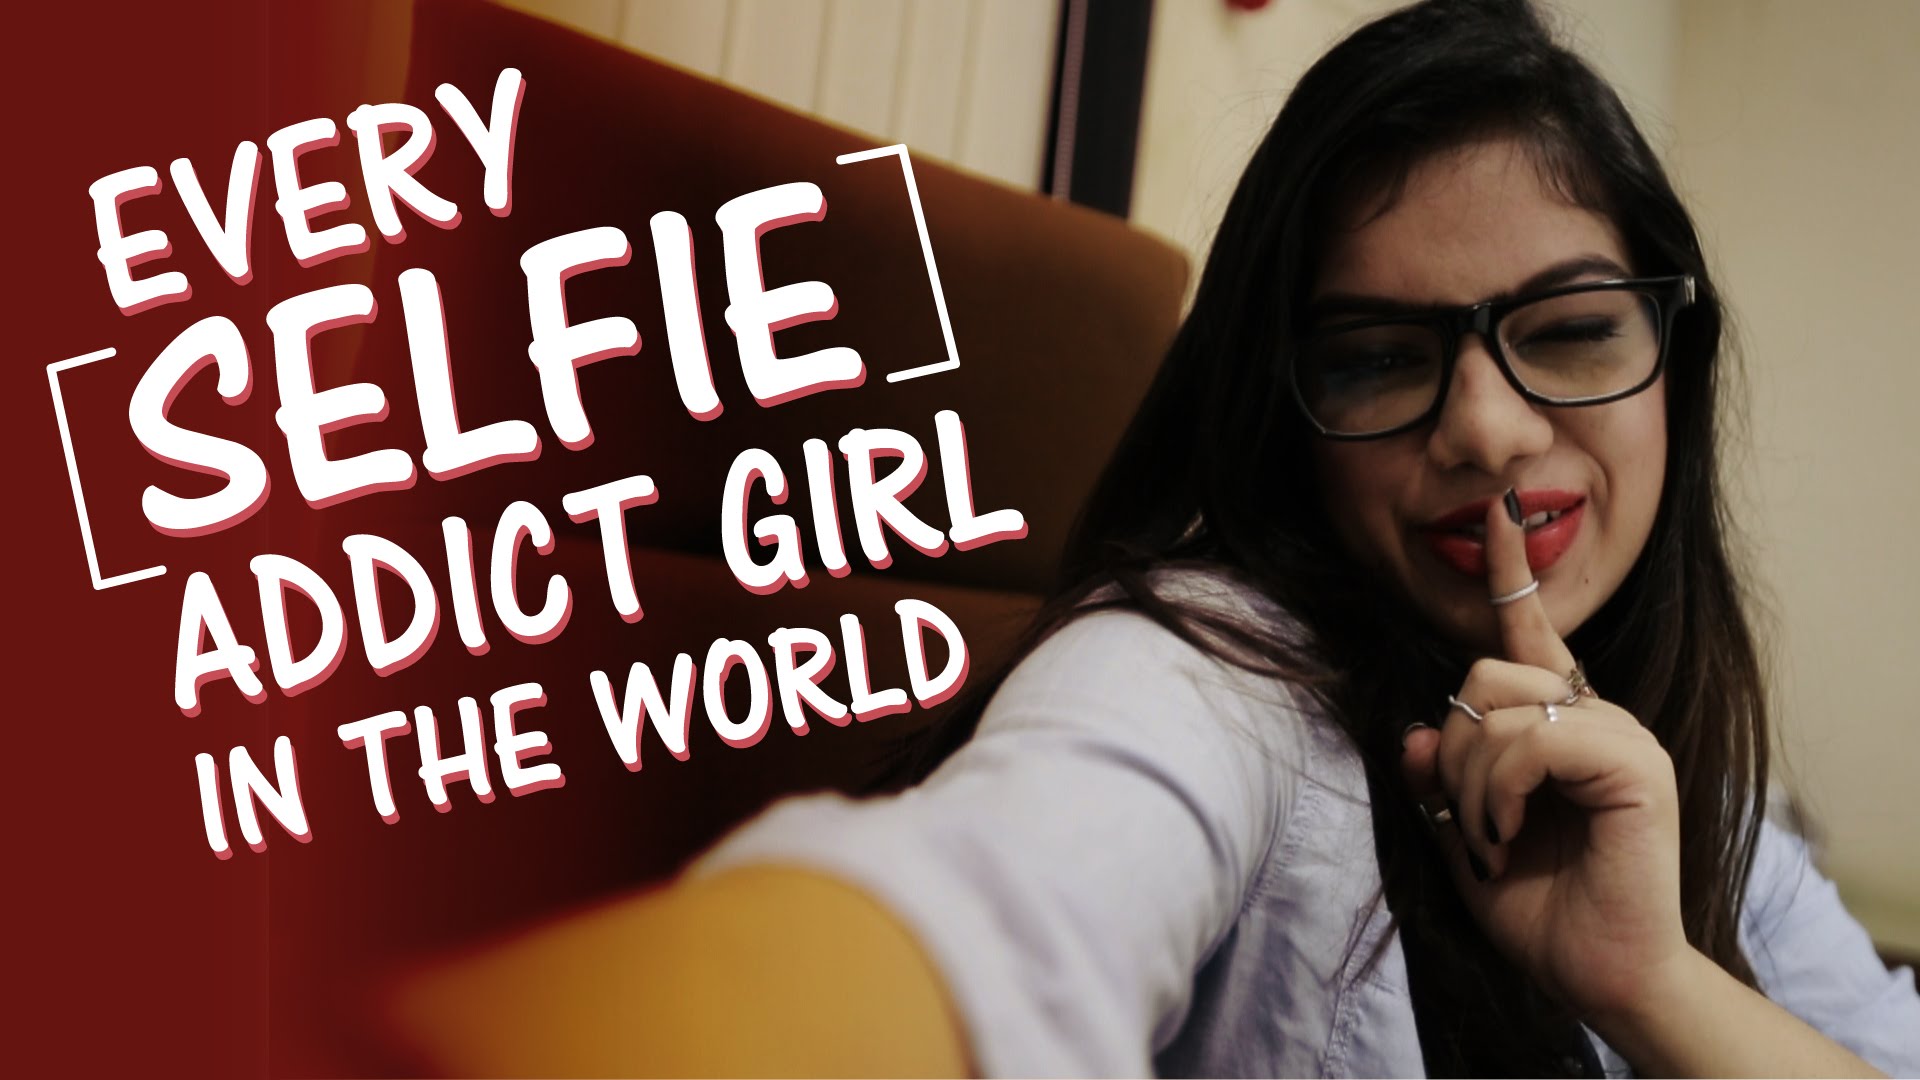 Video: Every Selfie Addict Girl In The World